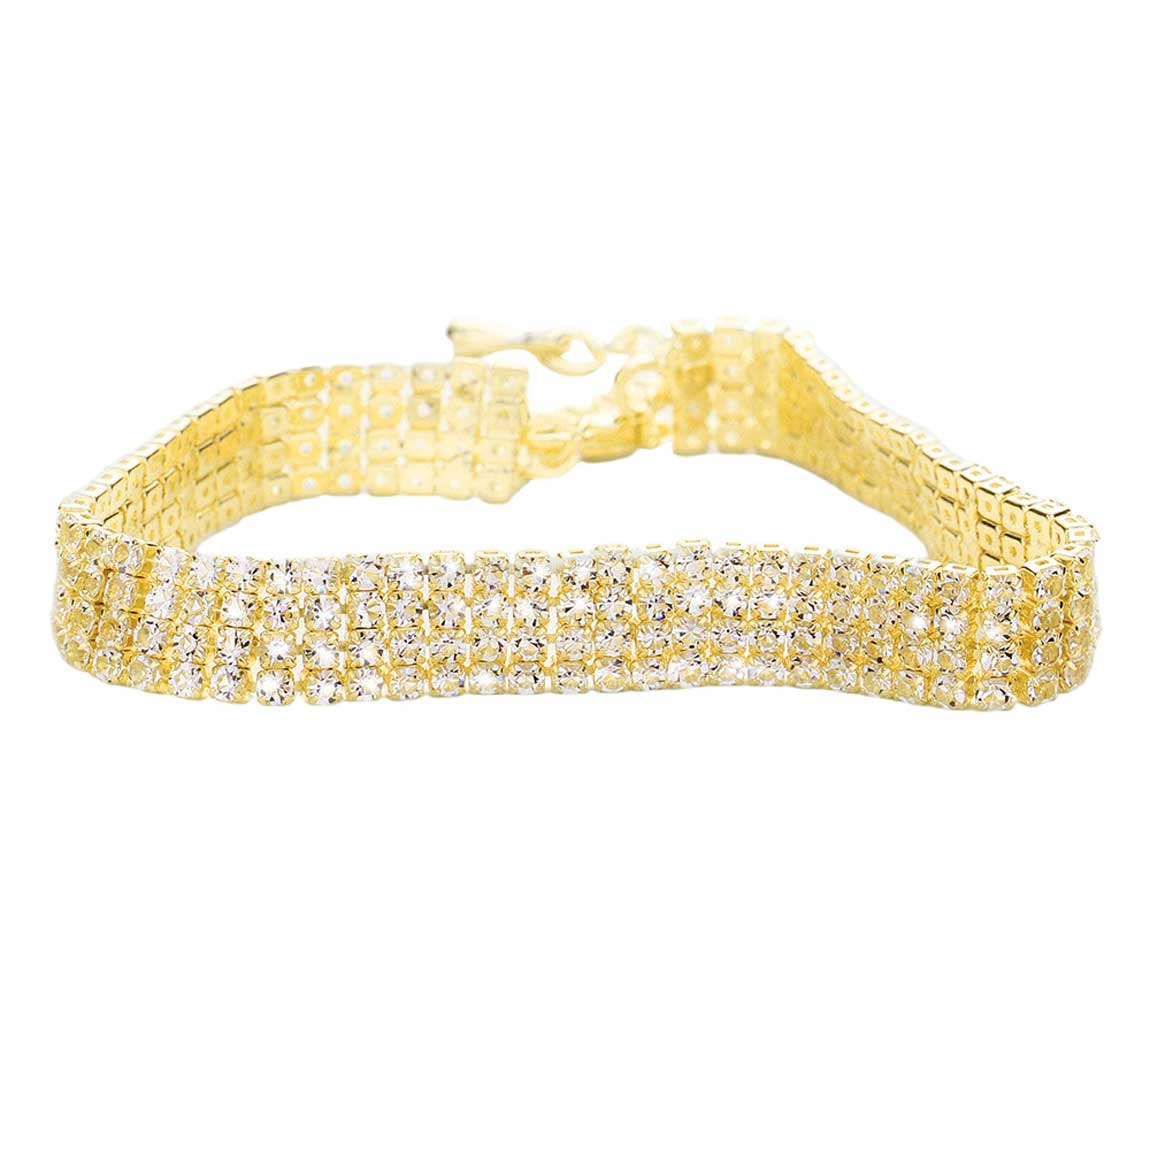 Gold 4 Row Crystal Rhinestone Embellished Tennis Evening Bracelet, These gorgeous Crystal Rhinestone pieces will show your class on any special occasion. These bracelets are perfect for any event whether formal or casual or for going to a party or special occasion. The perfect gift for a birthday, Party, Christmas, etc.